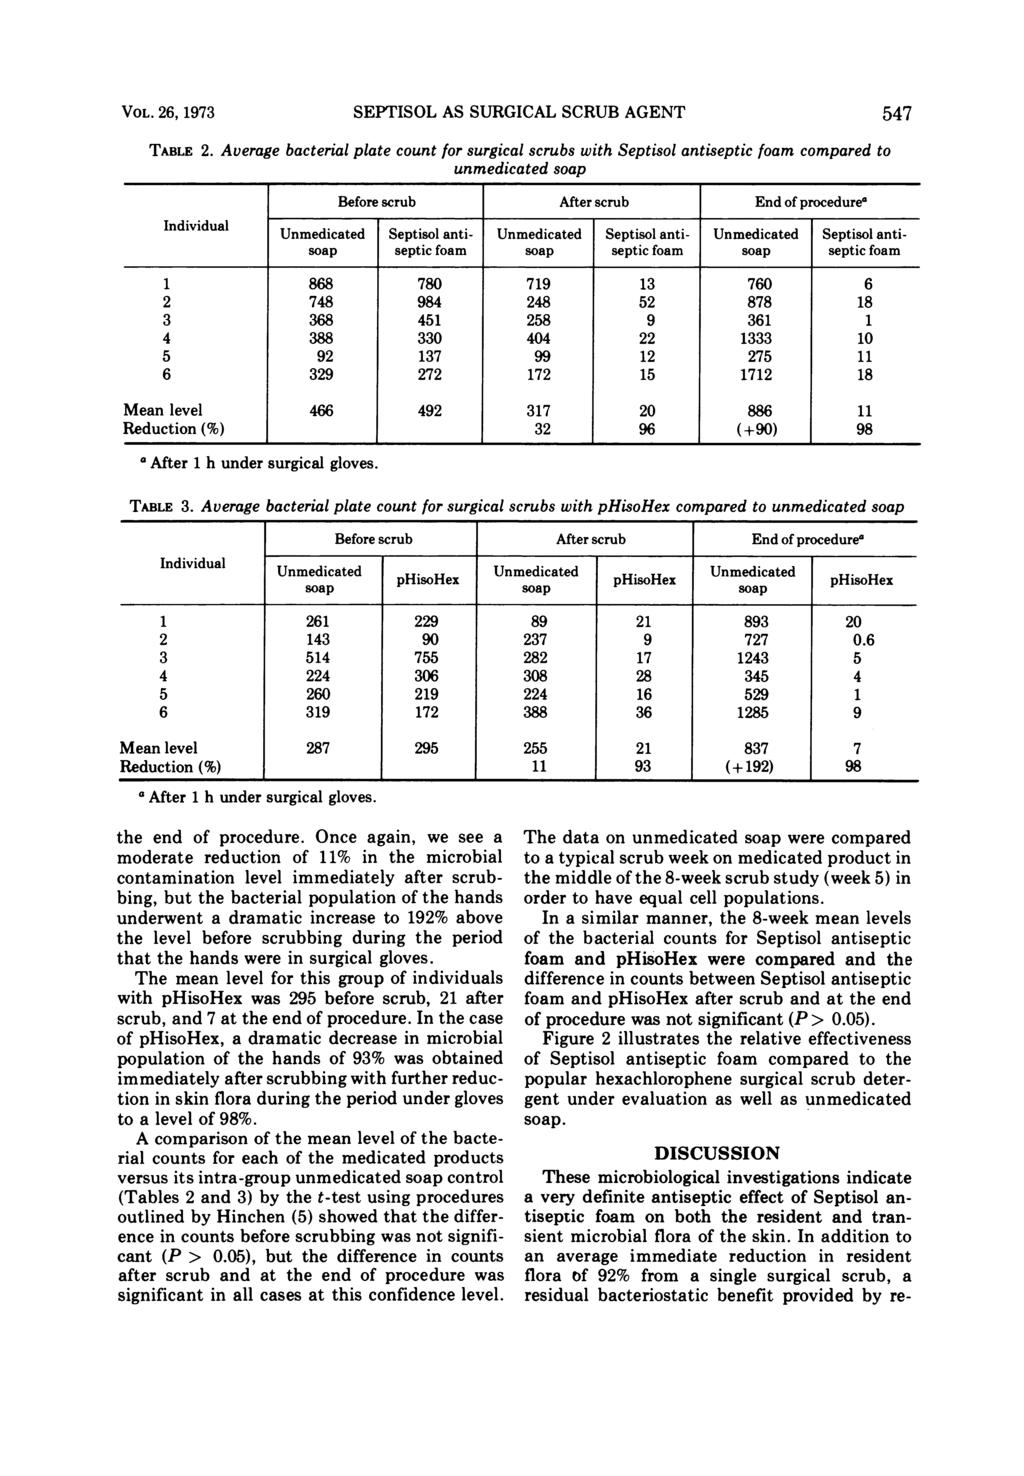 VOL. 26, 1973 SEPTISOL AS SURGICAL SCRUB AGENT 547 TABLE 2.